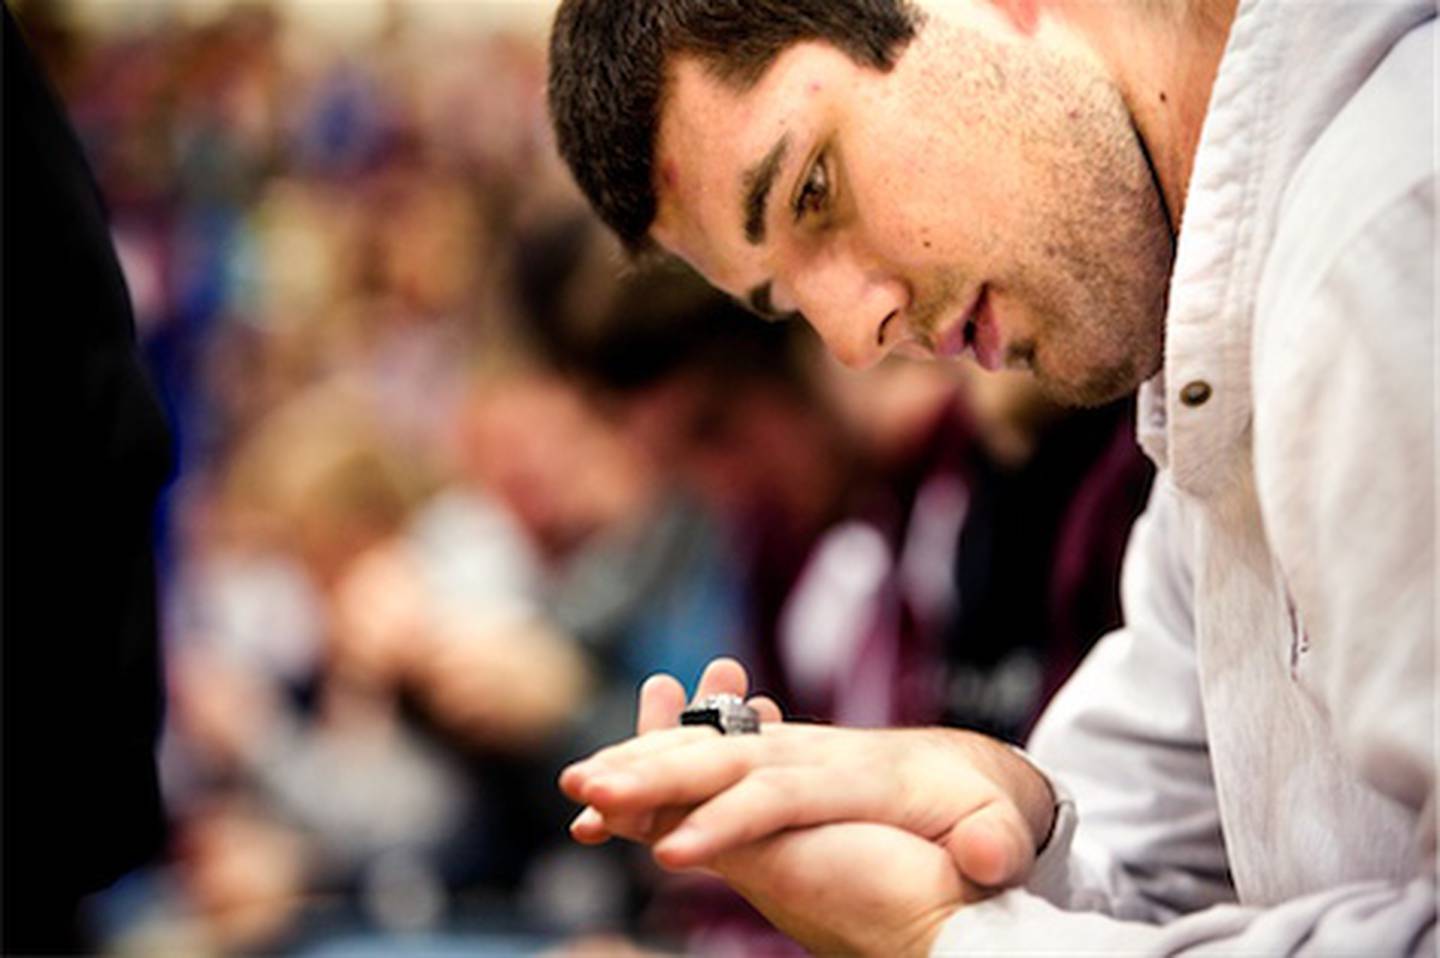 Prairie Ridge senior tight end and punter Nick Margiotta looks at his IHSA Class 6A football state title ring after receiving it Wednesday during an assembly at the high school in Crystal Lake. The school also honored athletes from other sports and students selected to the All-State choir.